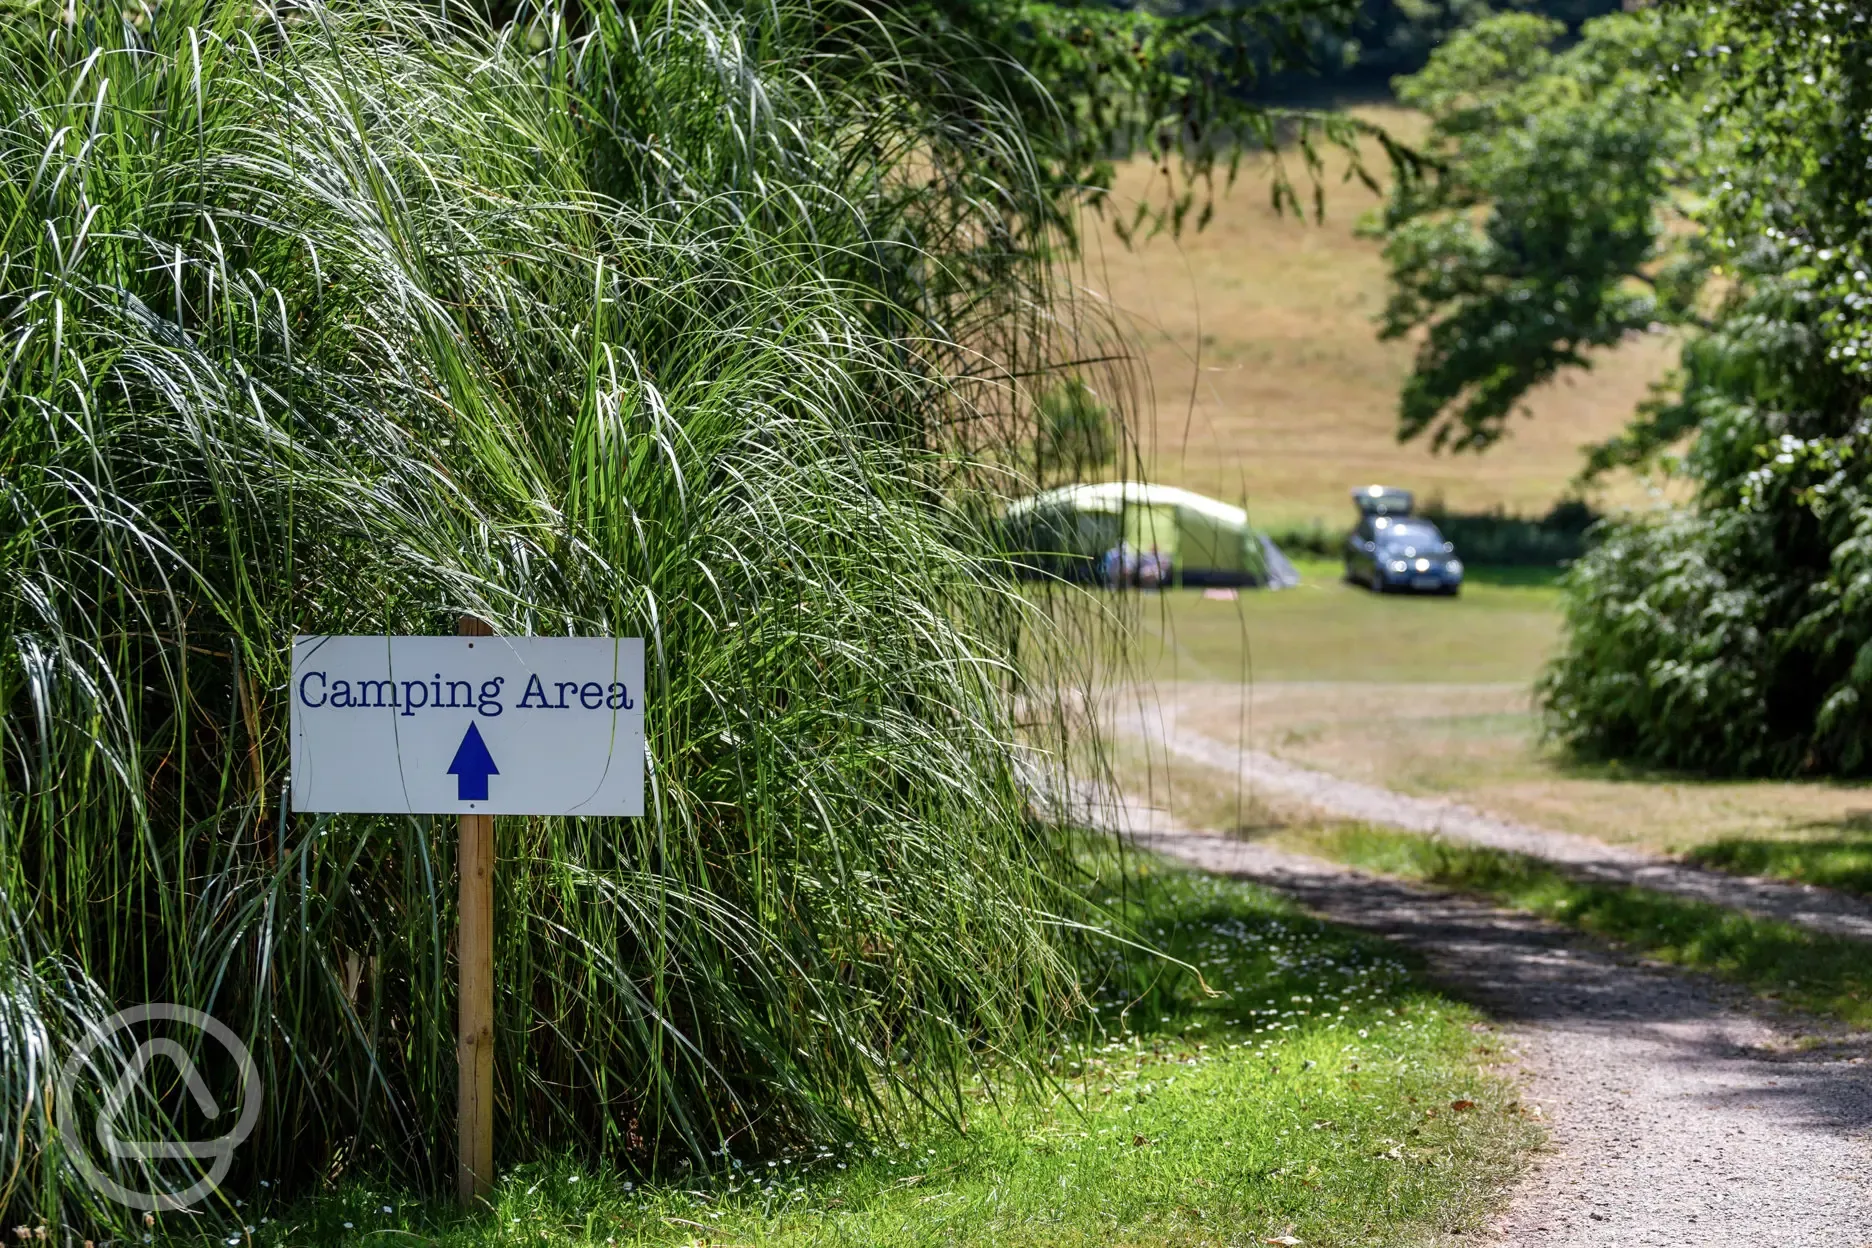 Entrance to the camping field